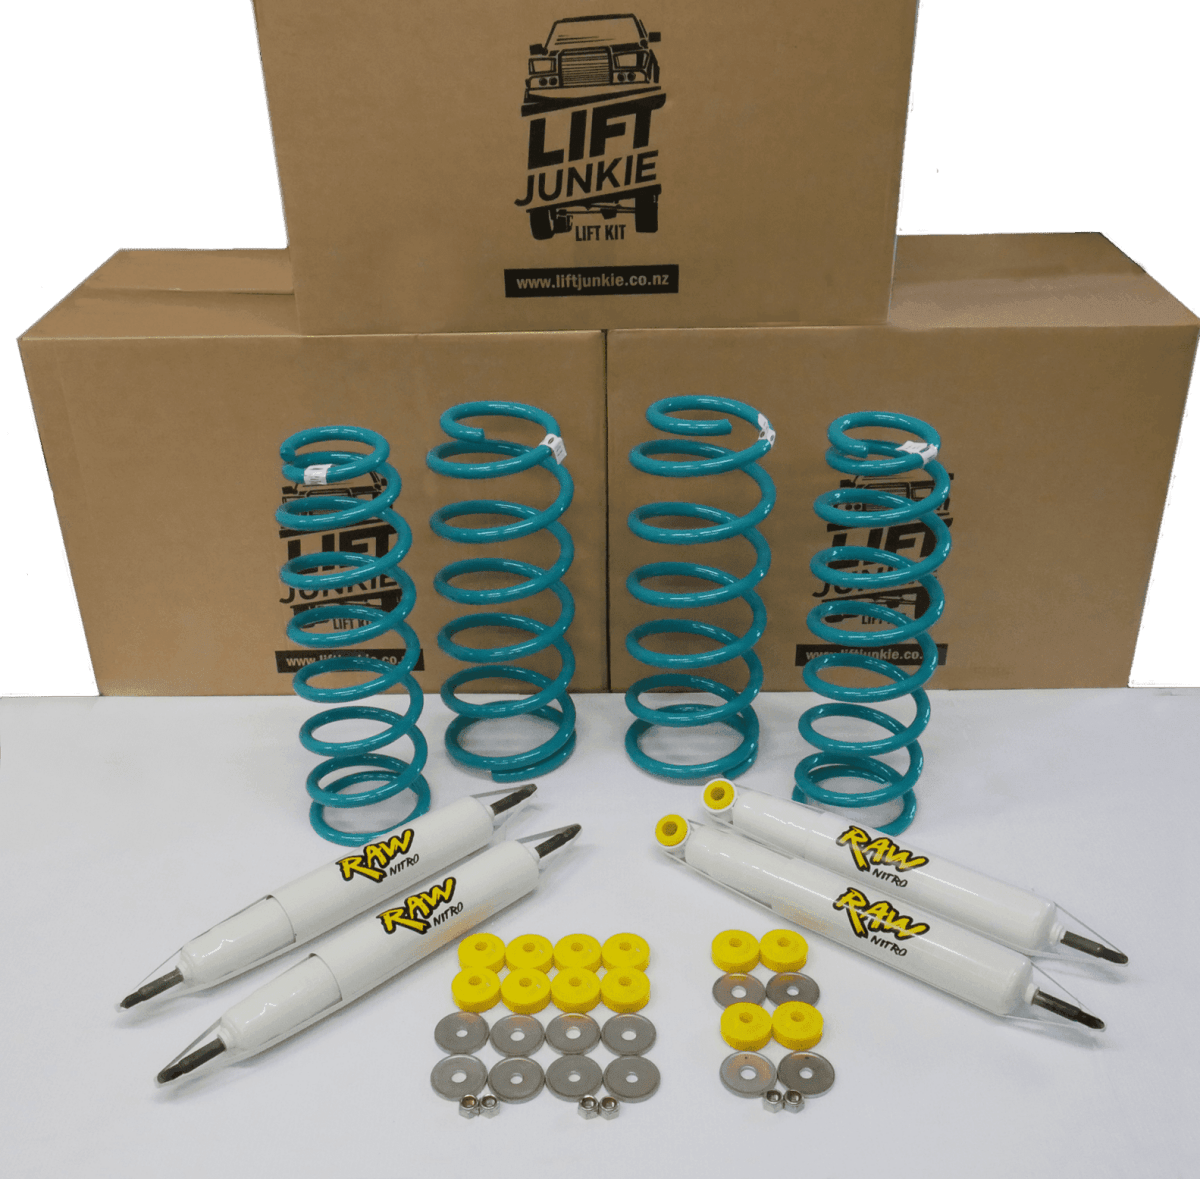 Lift Junkie 2" Lift Kit to Suit Toyota Landcruiser 80 Series (08/1991 to 1998) - NZ Offroader